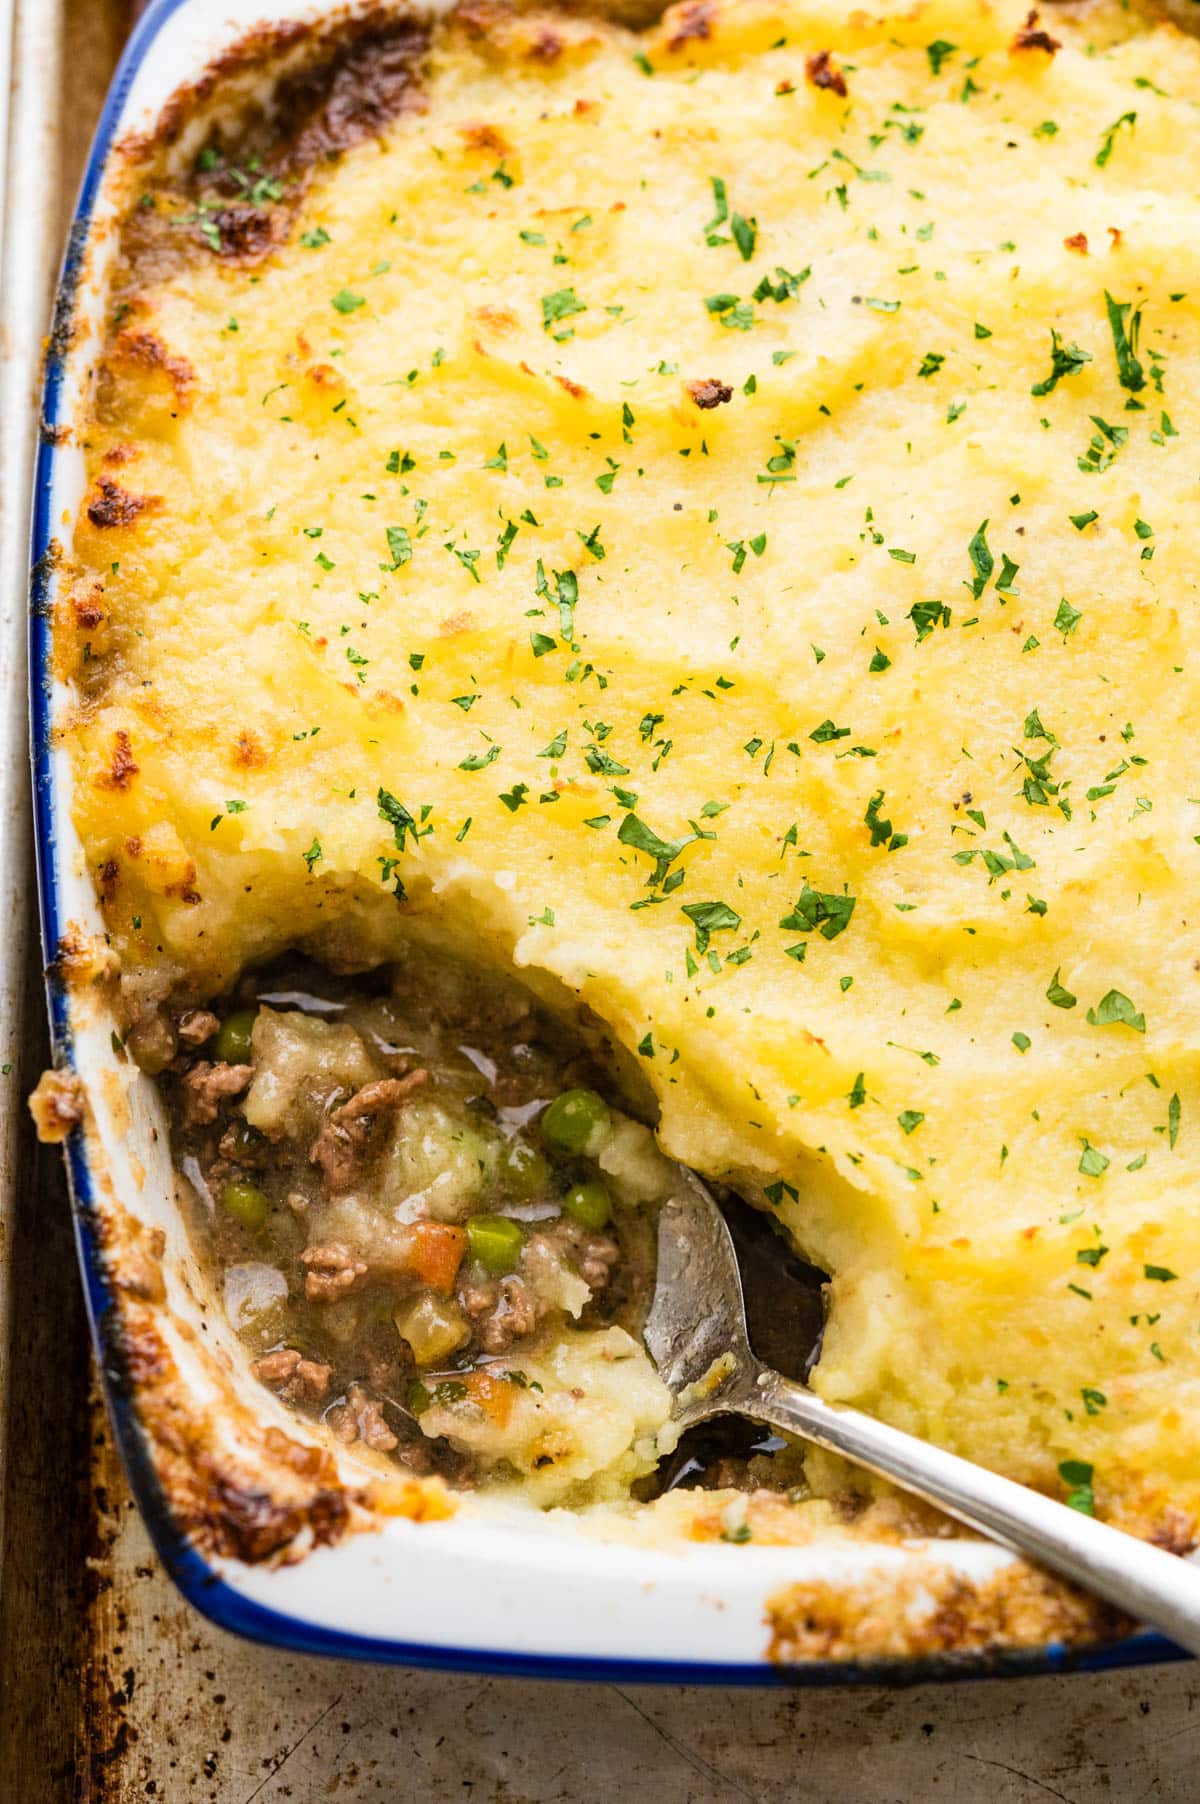 Scooping up the shepherd's pie with gravy and vegetables.